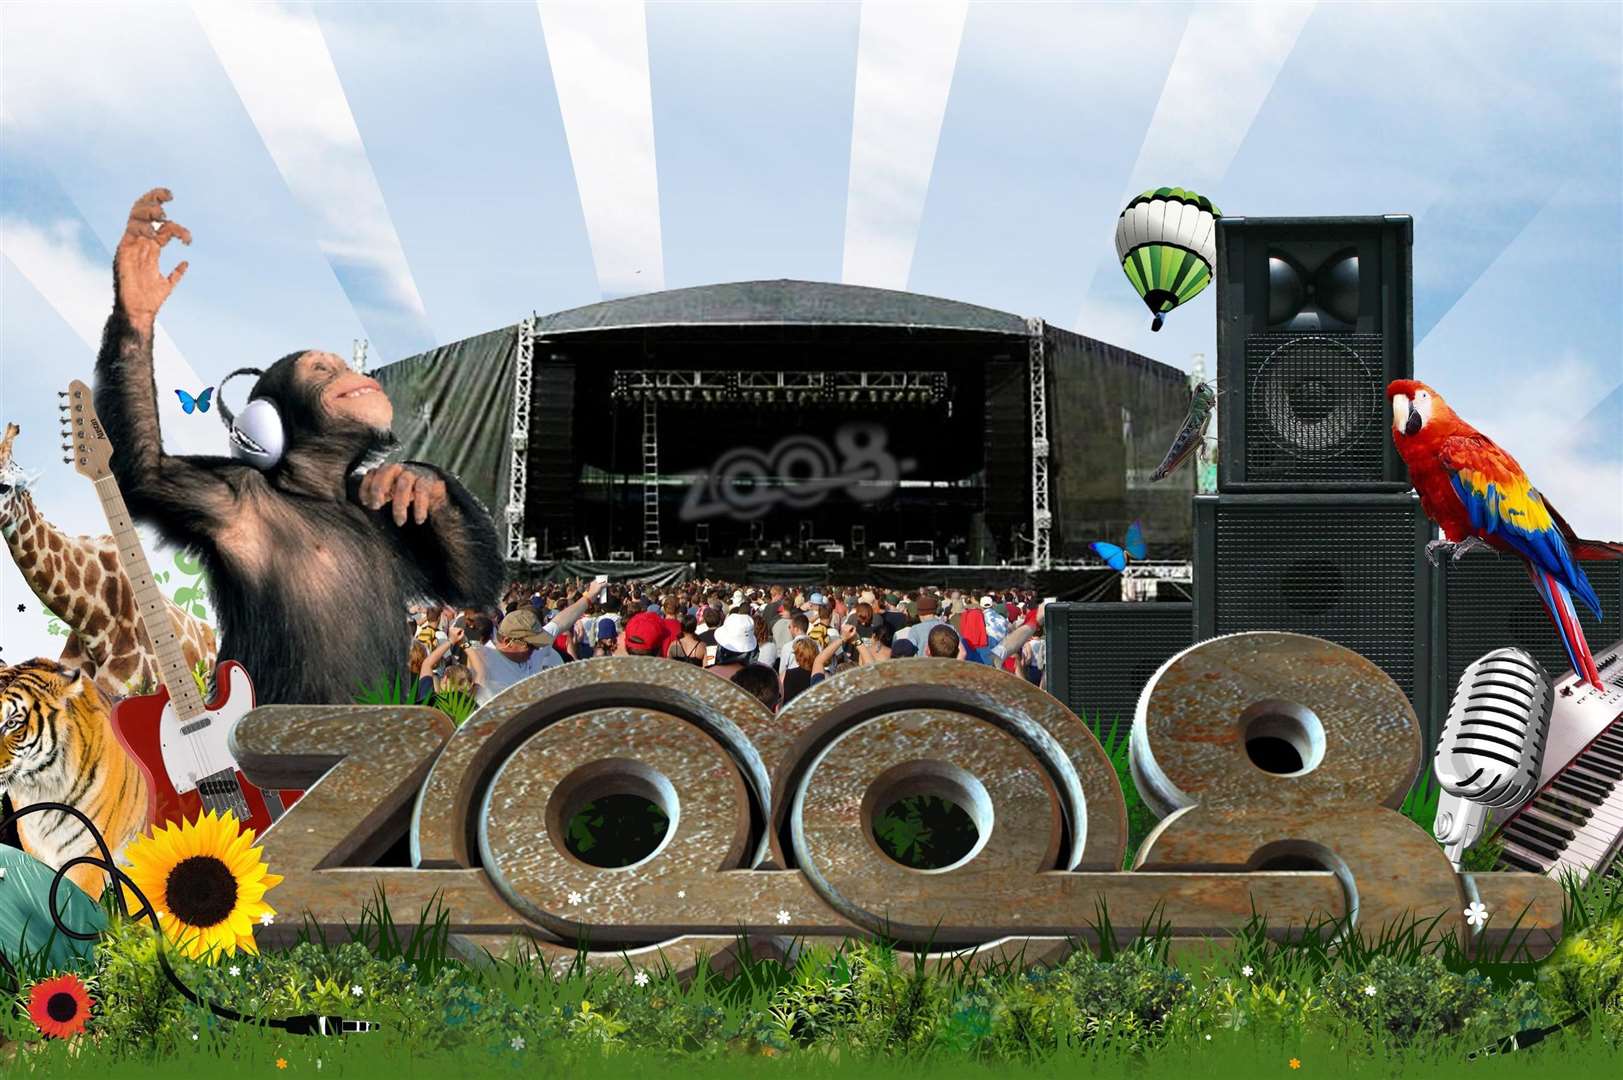 Zoo8 - a great logo, but a poor event